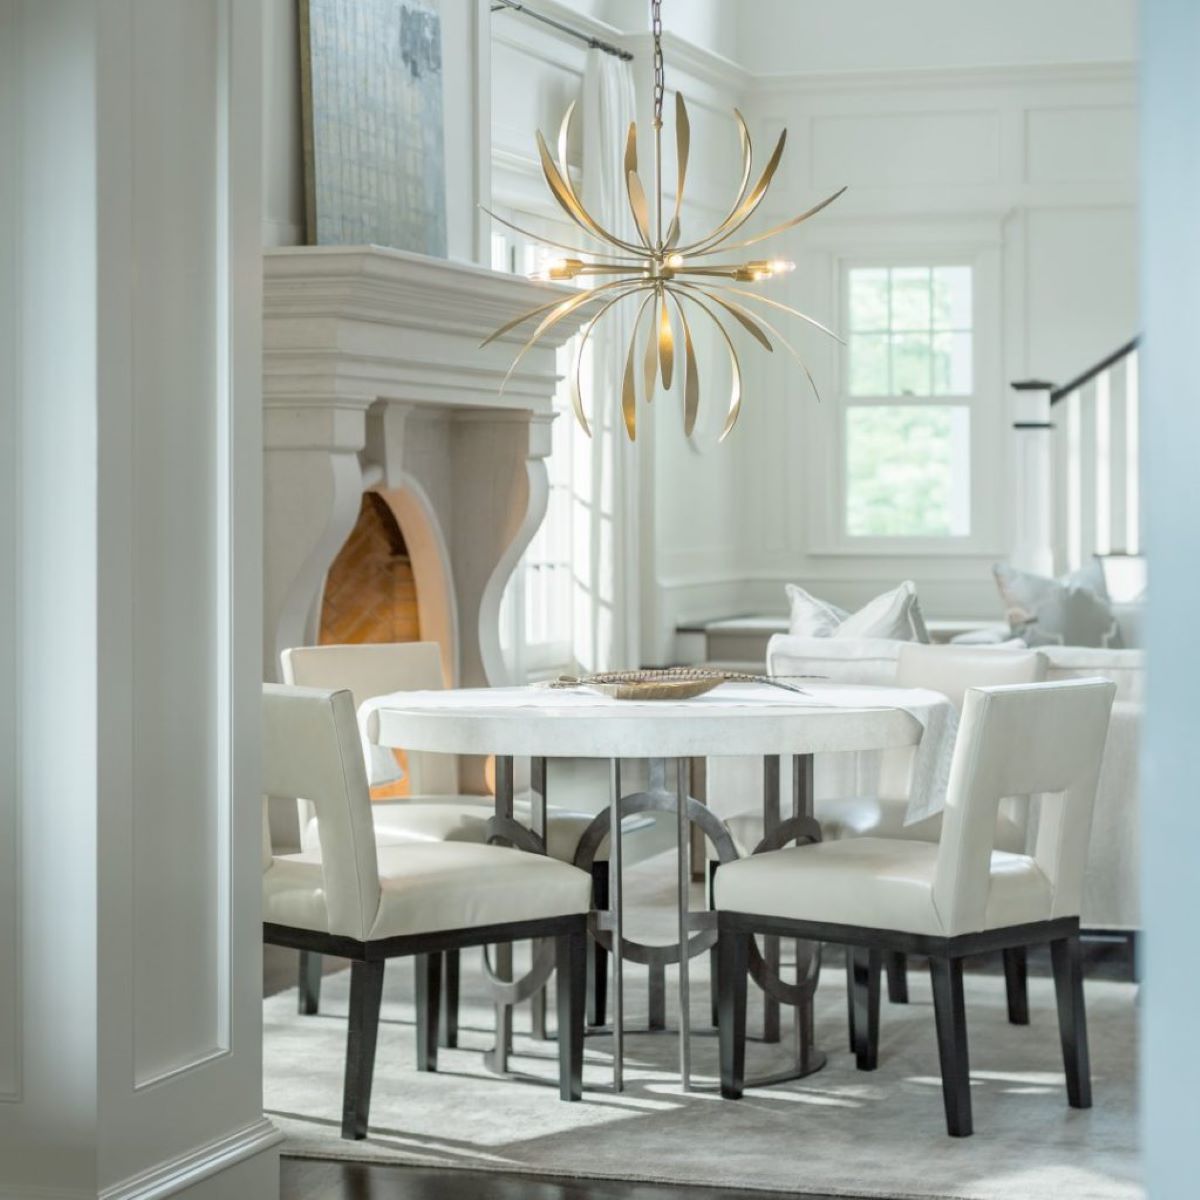 What Height Should A Dining Room Chandelier Hang